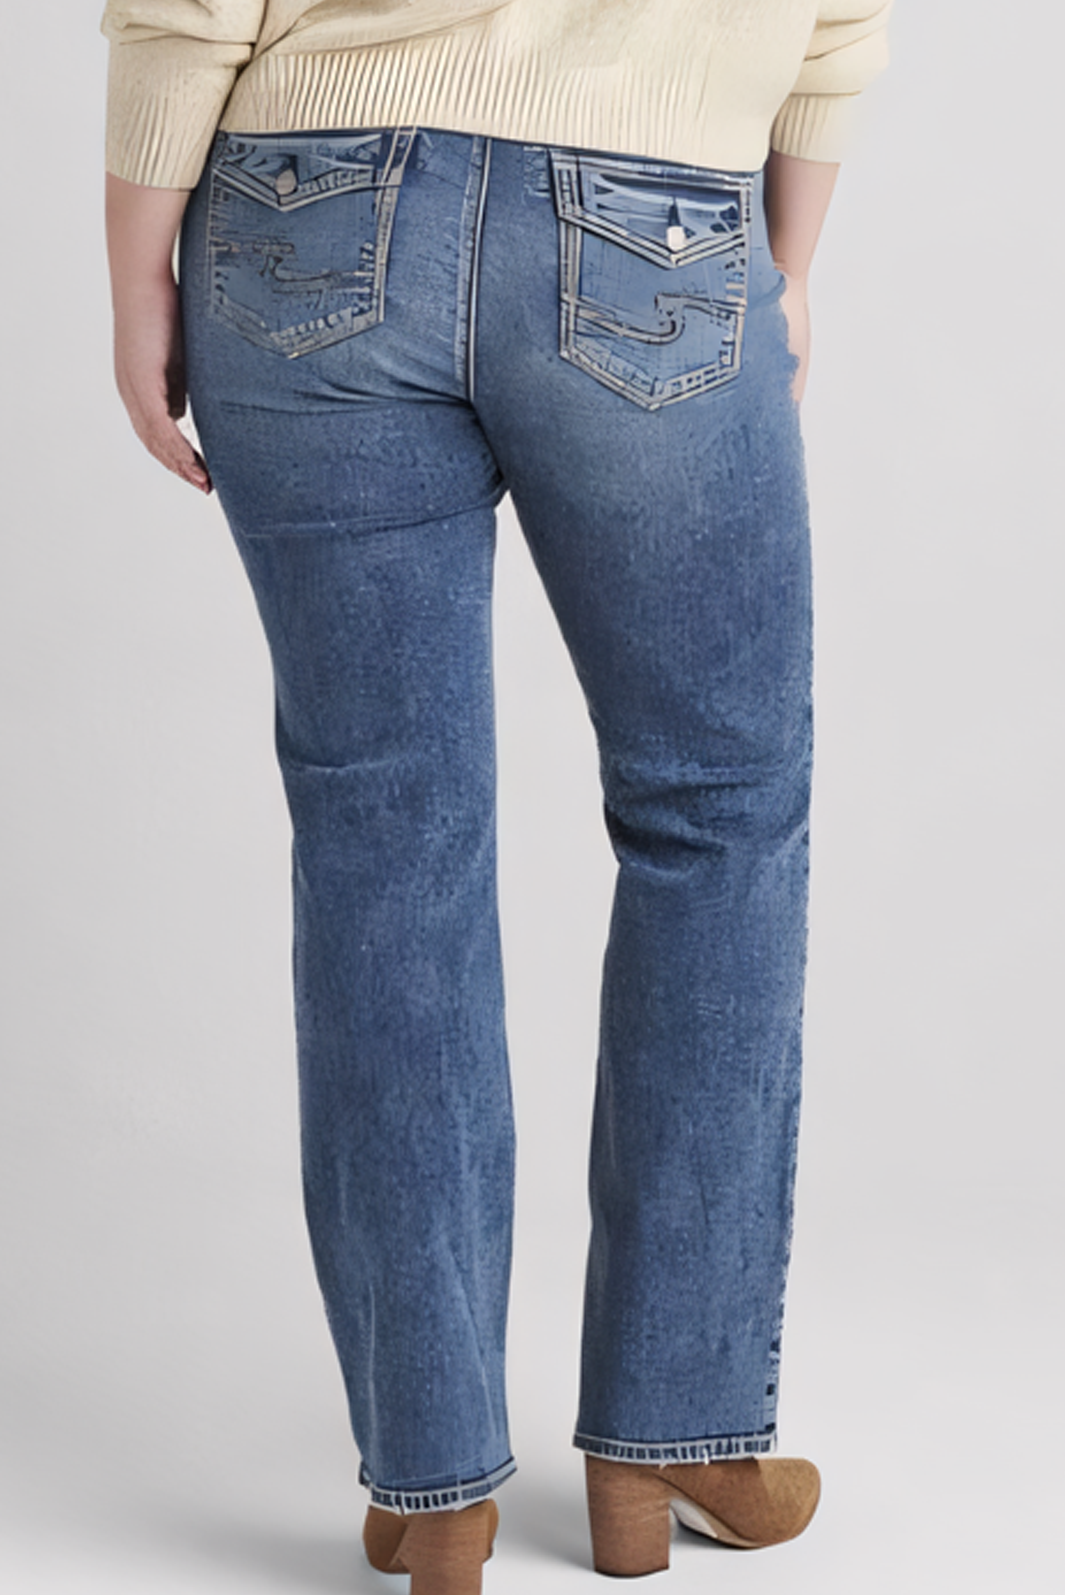 Silver Jeans Plus Size Elyse Slim Boot Jeans